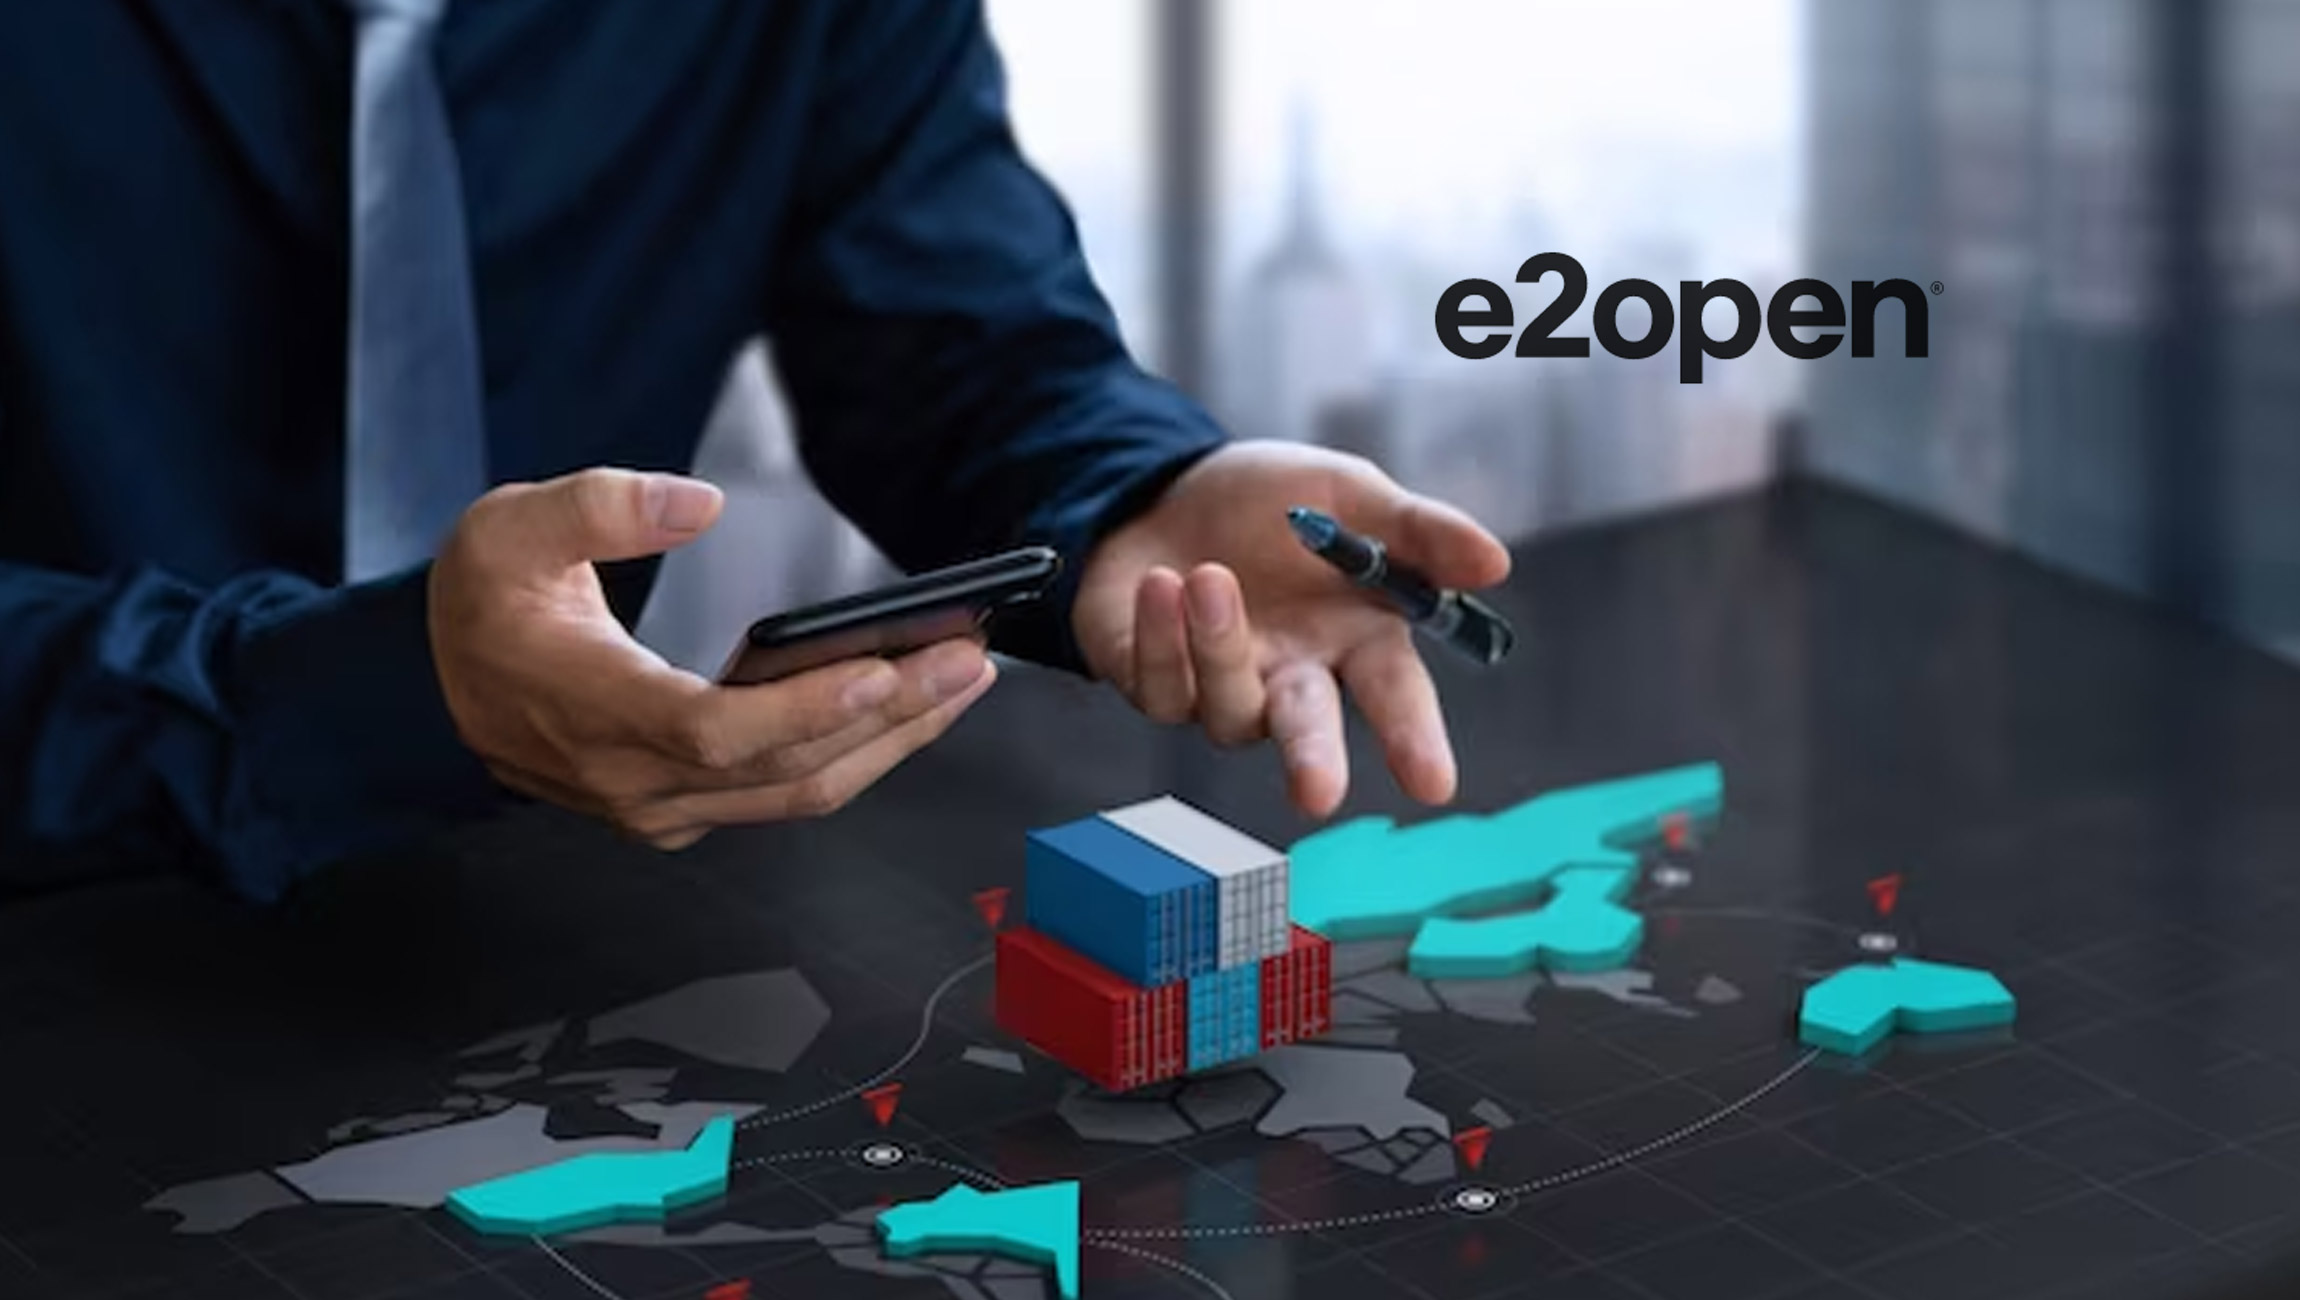 E2open Releases 2023 Environmental, Social, and Governance Reportgy Update Leverages the Power of e2open’s Network for Greater Visibility to Mitigate Risks and Improve Productivity Across the Extended Supply Chain